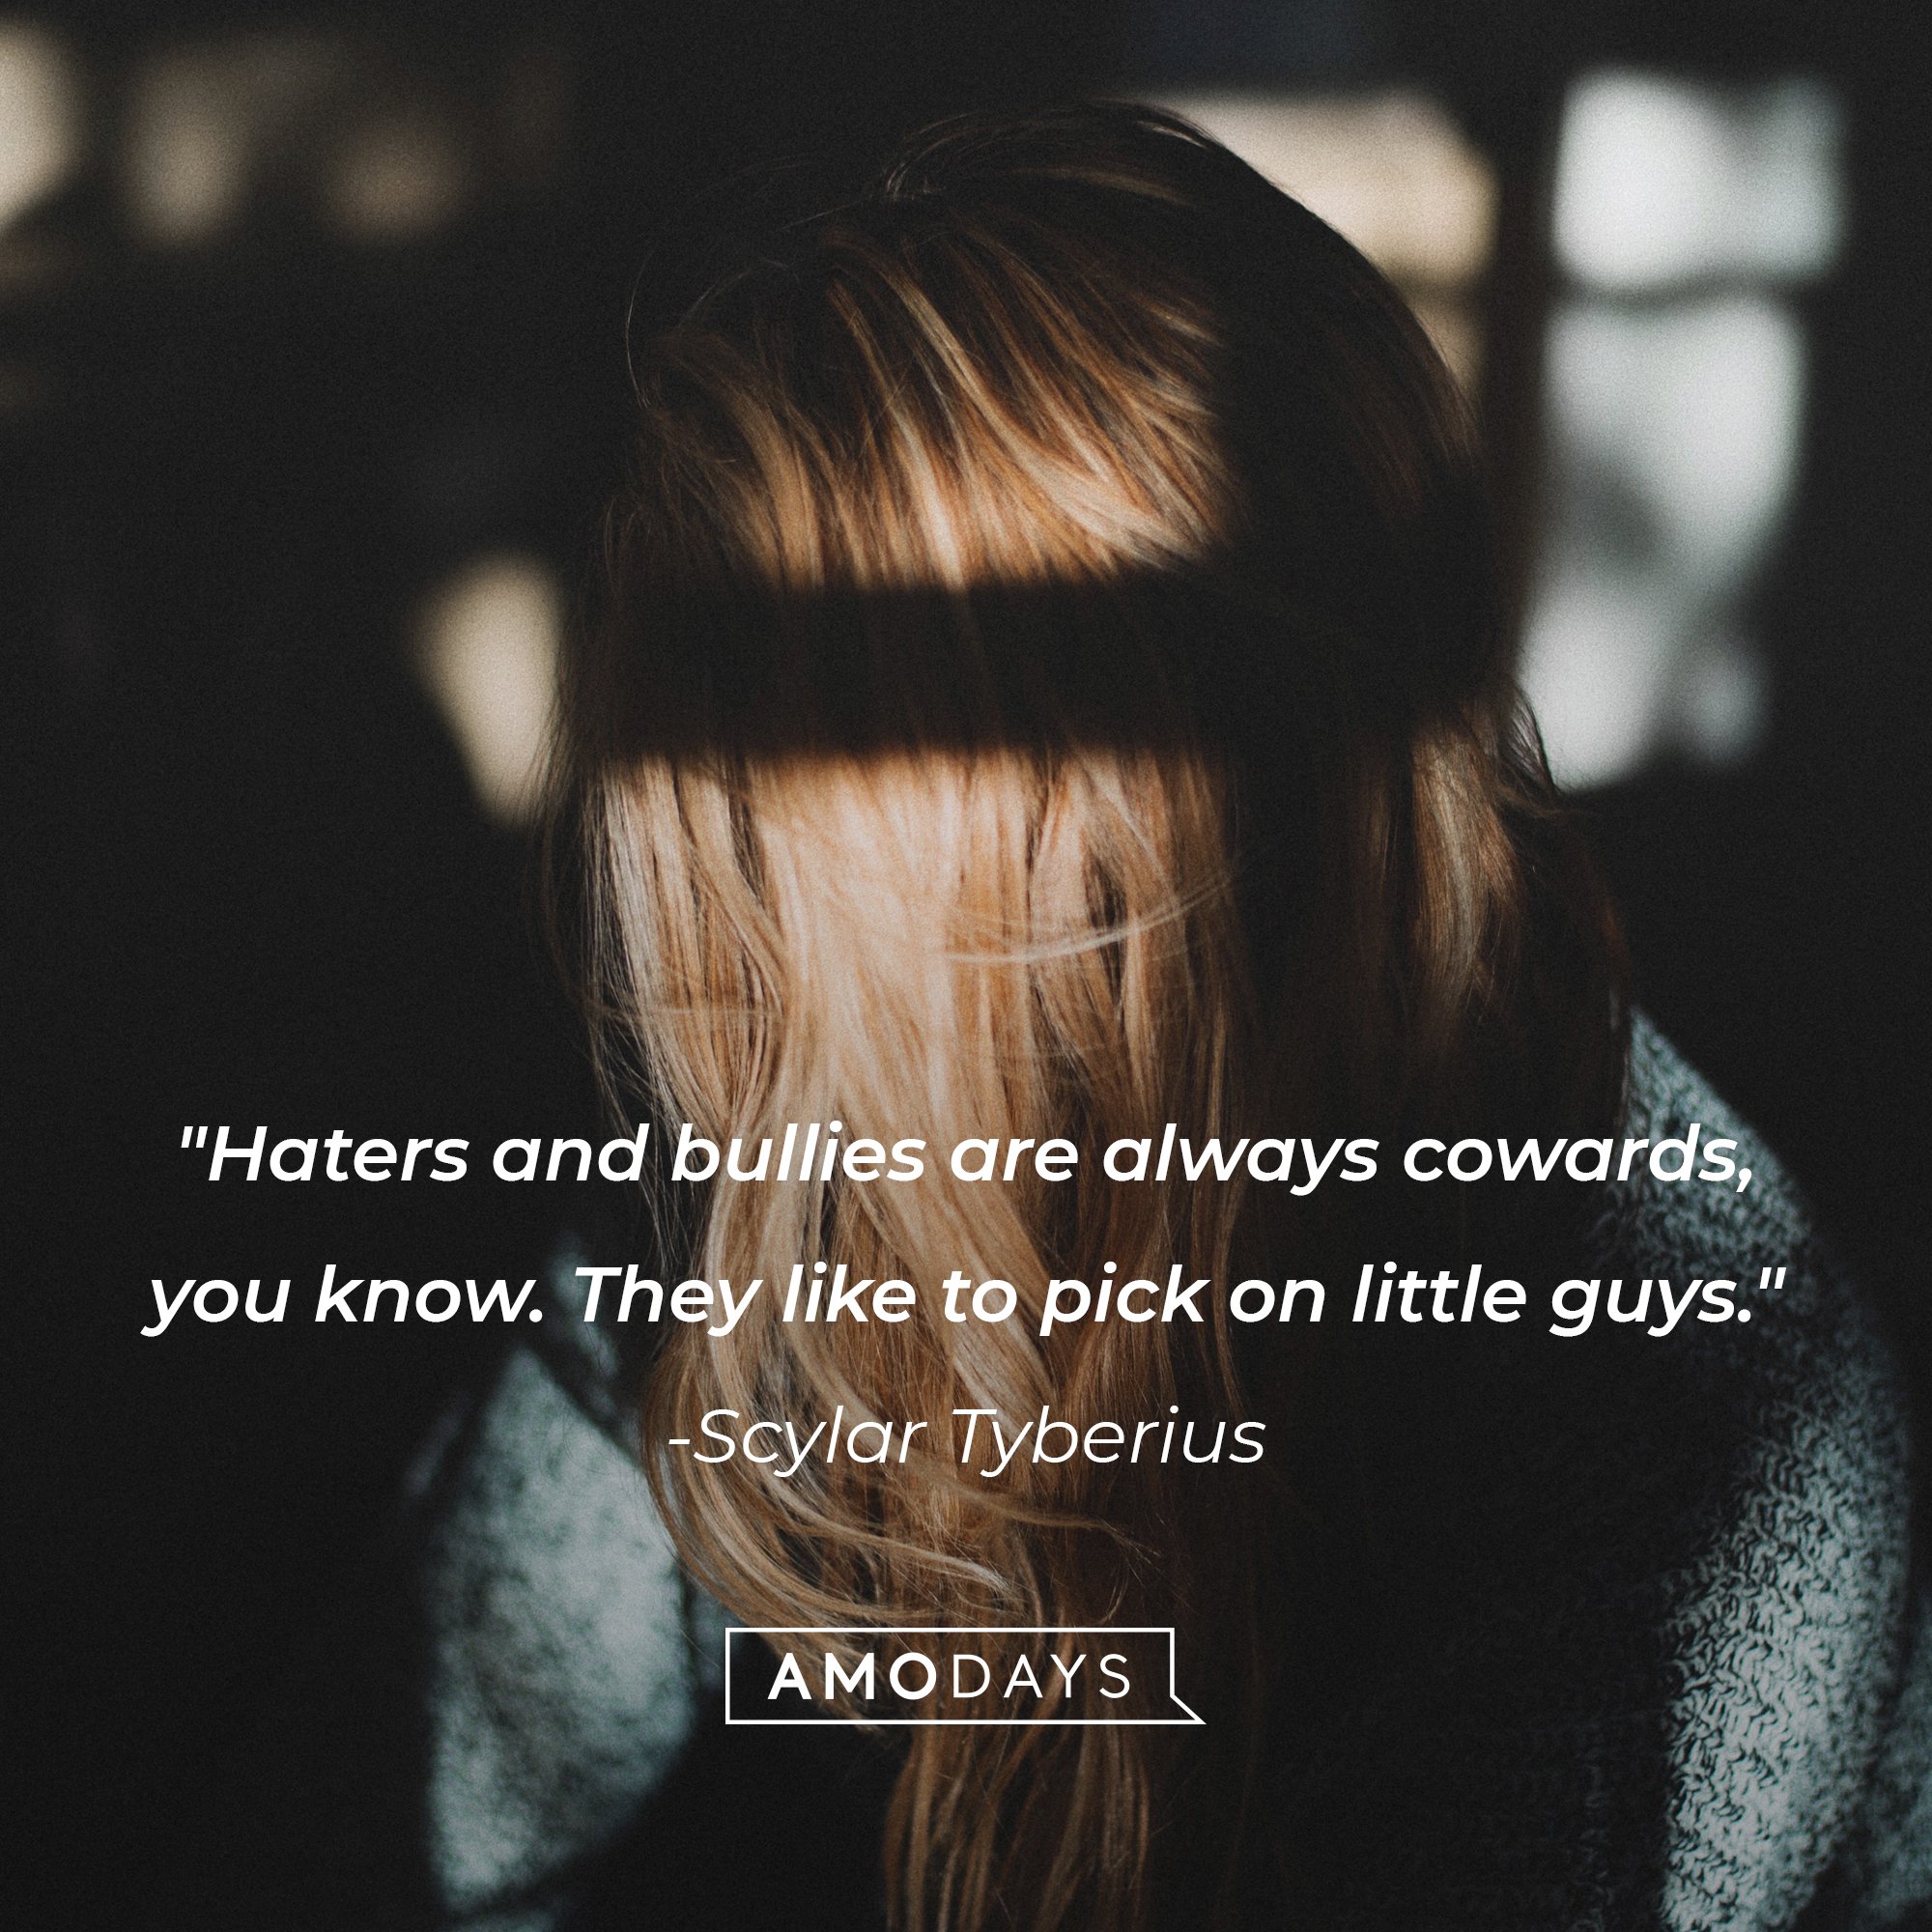 Scylar Tyberius’ quote:  "Haters and bullies are always cowards, you know. They like to pick on little guys." | Image: AmoDays